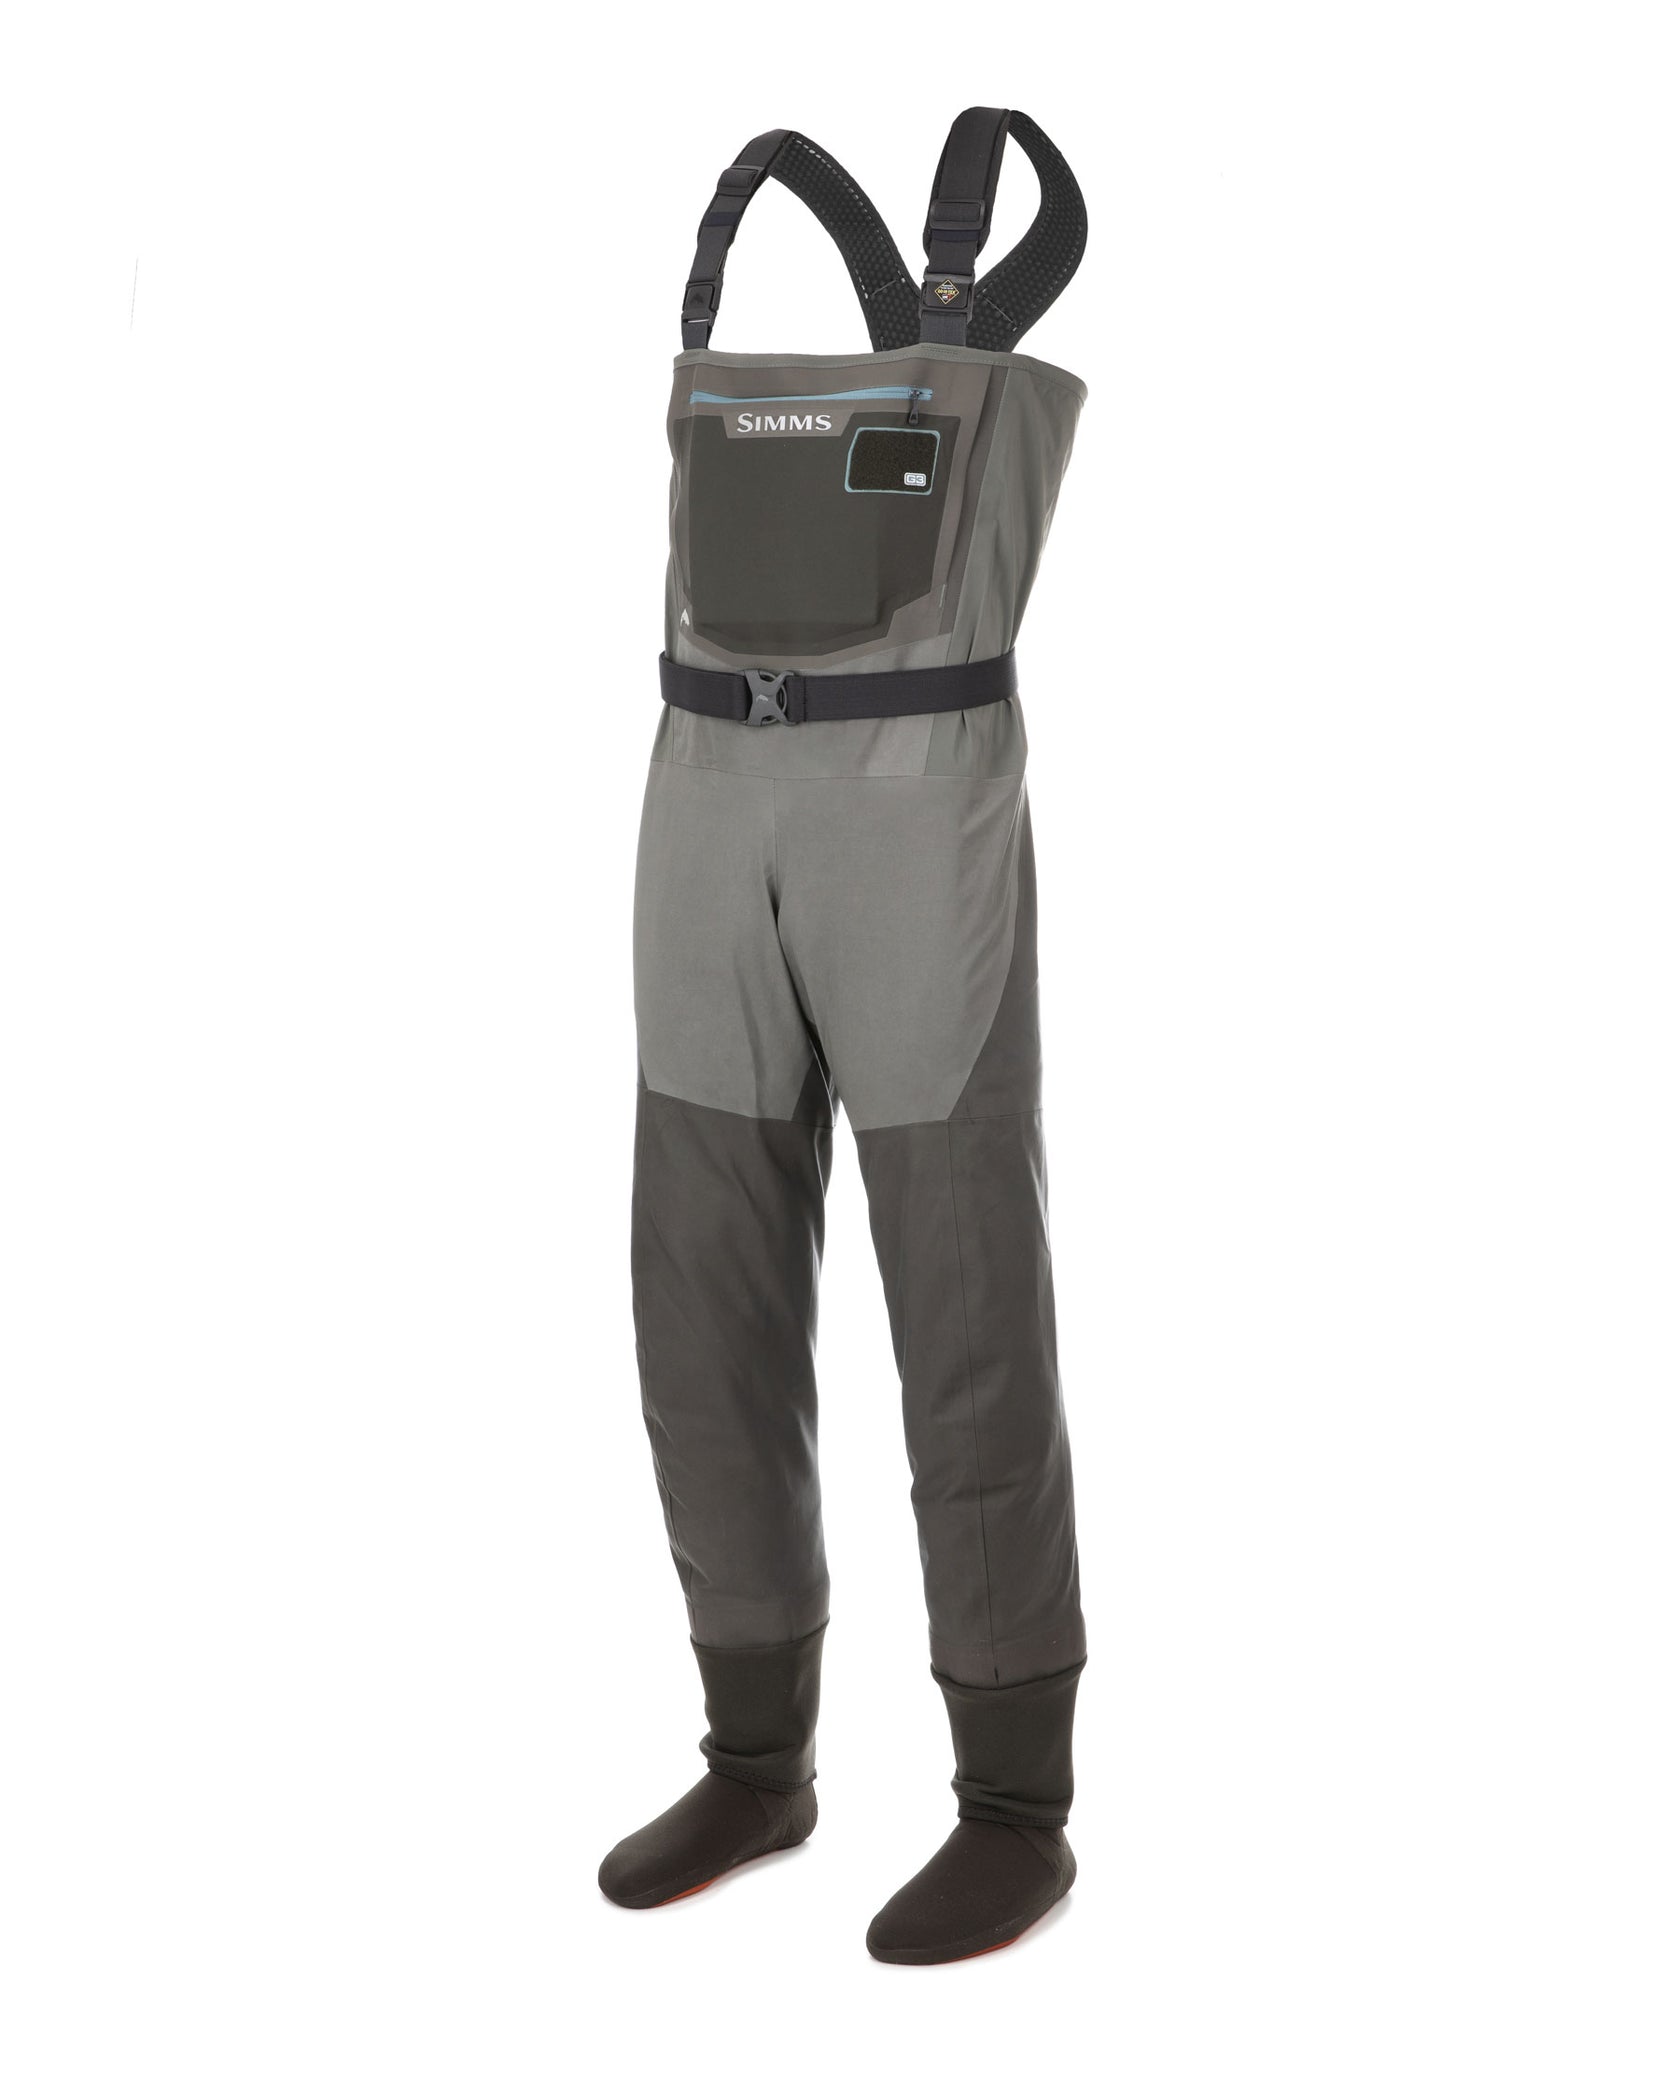 Simms W's G3 Guide Waders - SF (Small Full)